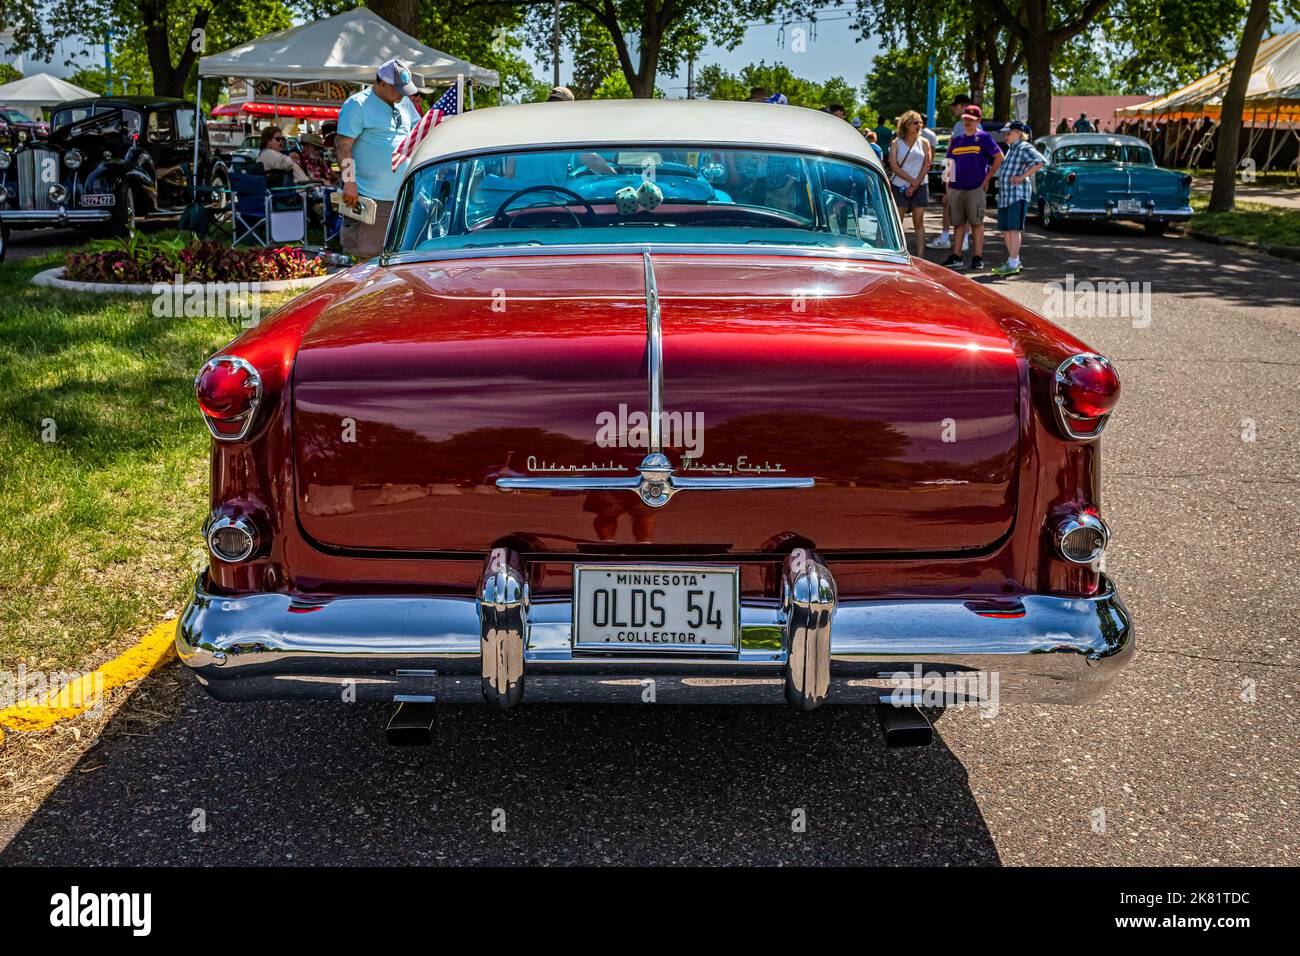 Falcon Heights, MN - June 19, 2022: High perspective rear view of a 1954 Oldsmobile 98 Holiday Hardtop Coupe at a local car show. Stock Photo